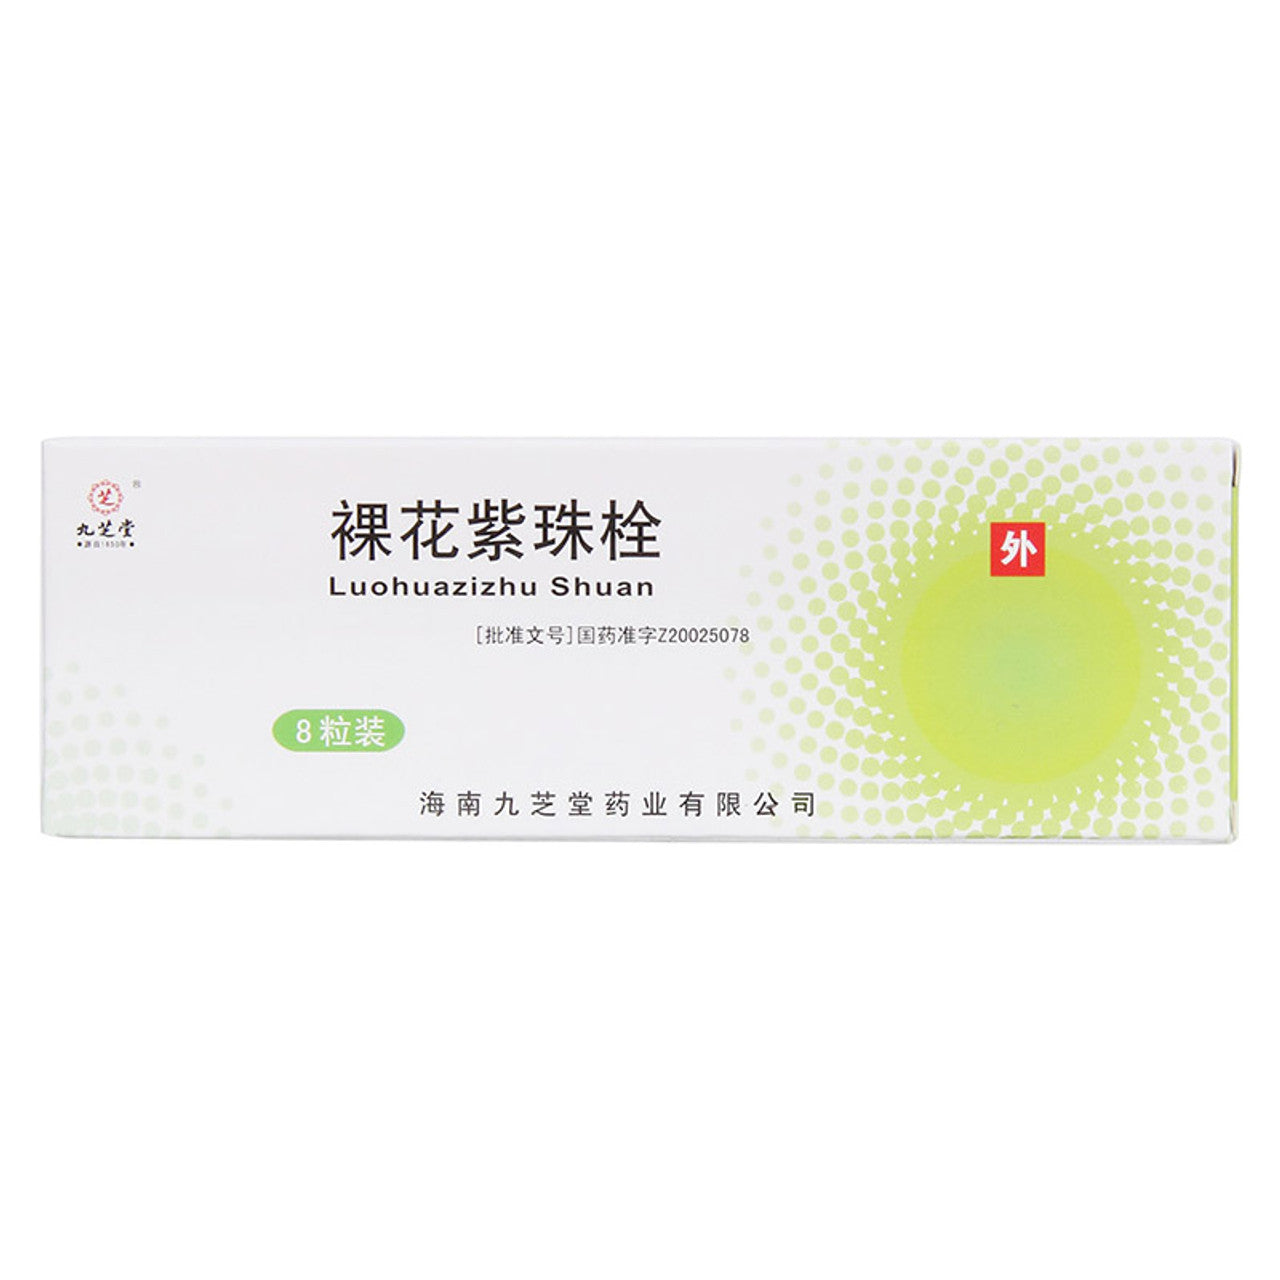 China Herb Suppository. Jiuzhitang Luohuazizhu Shuan / Luohuazizhu Suppository / Luo Hua Zi Zhu Shuan / Nude Flower Purple Beads Suppository for cervicitis, Candida albicans vaginitis